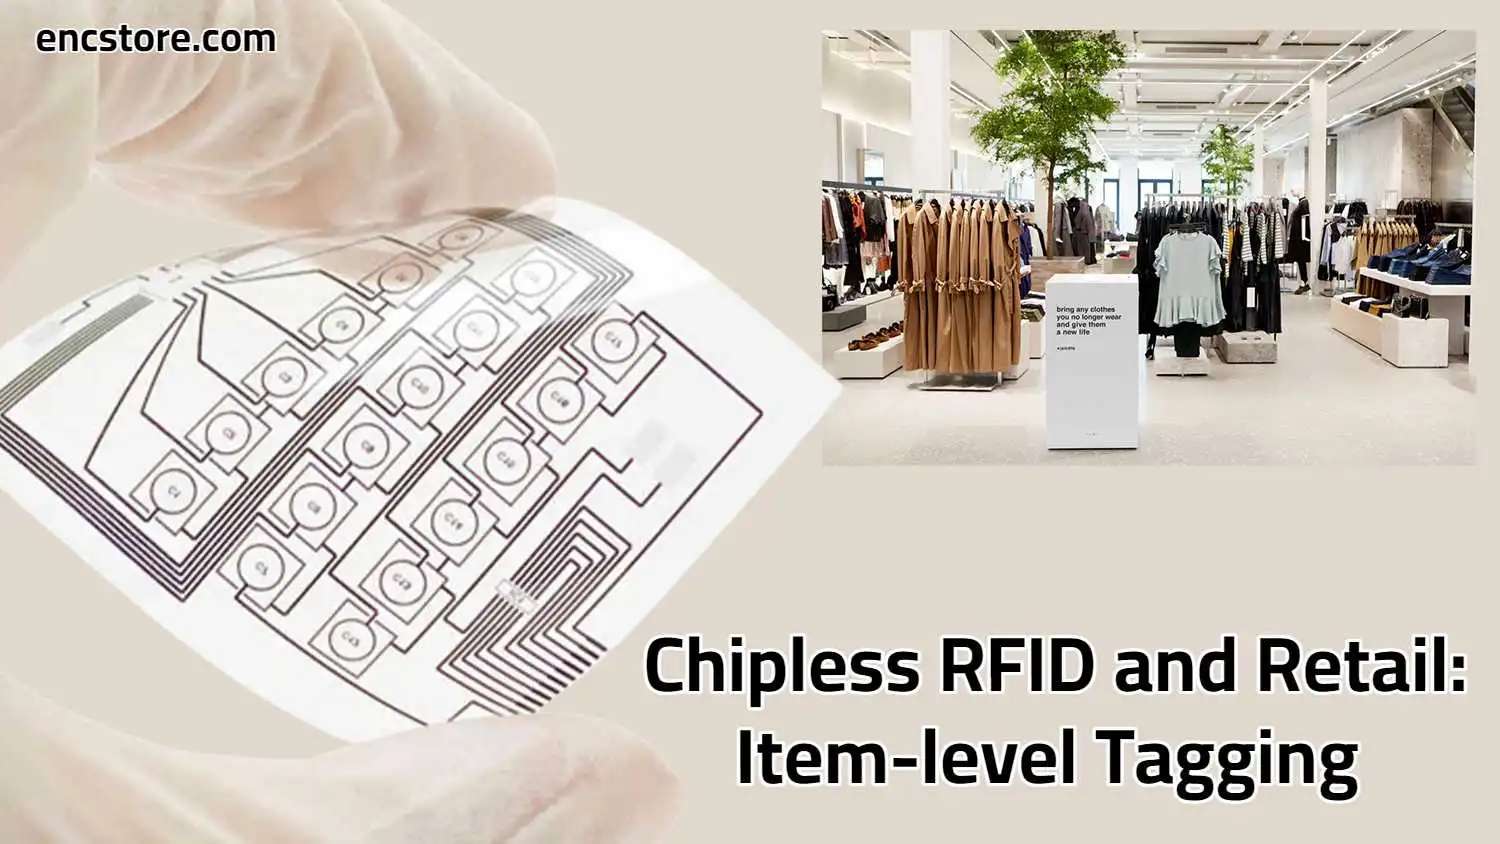 Chipless RFID and Retail